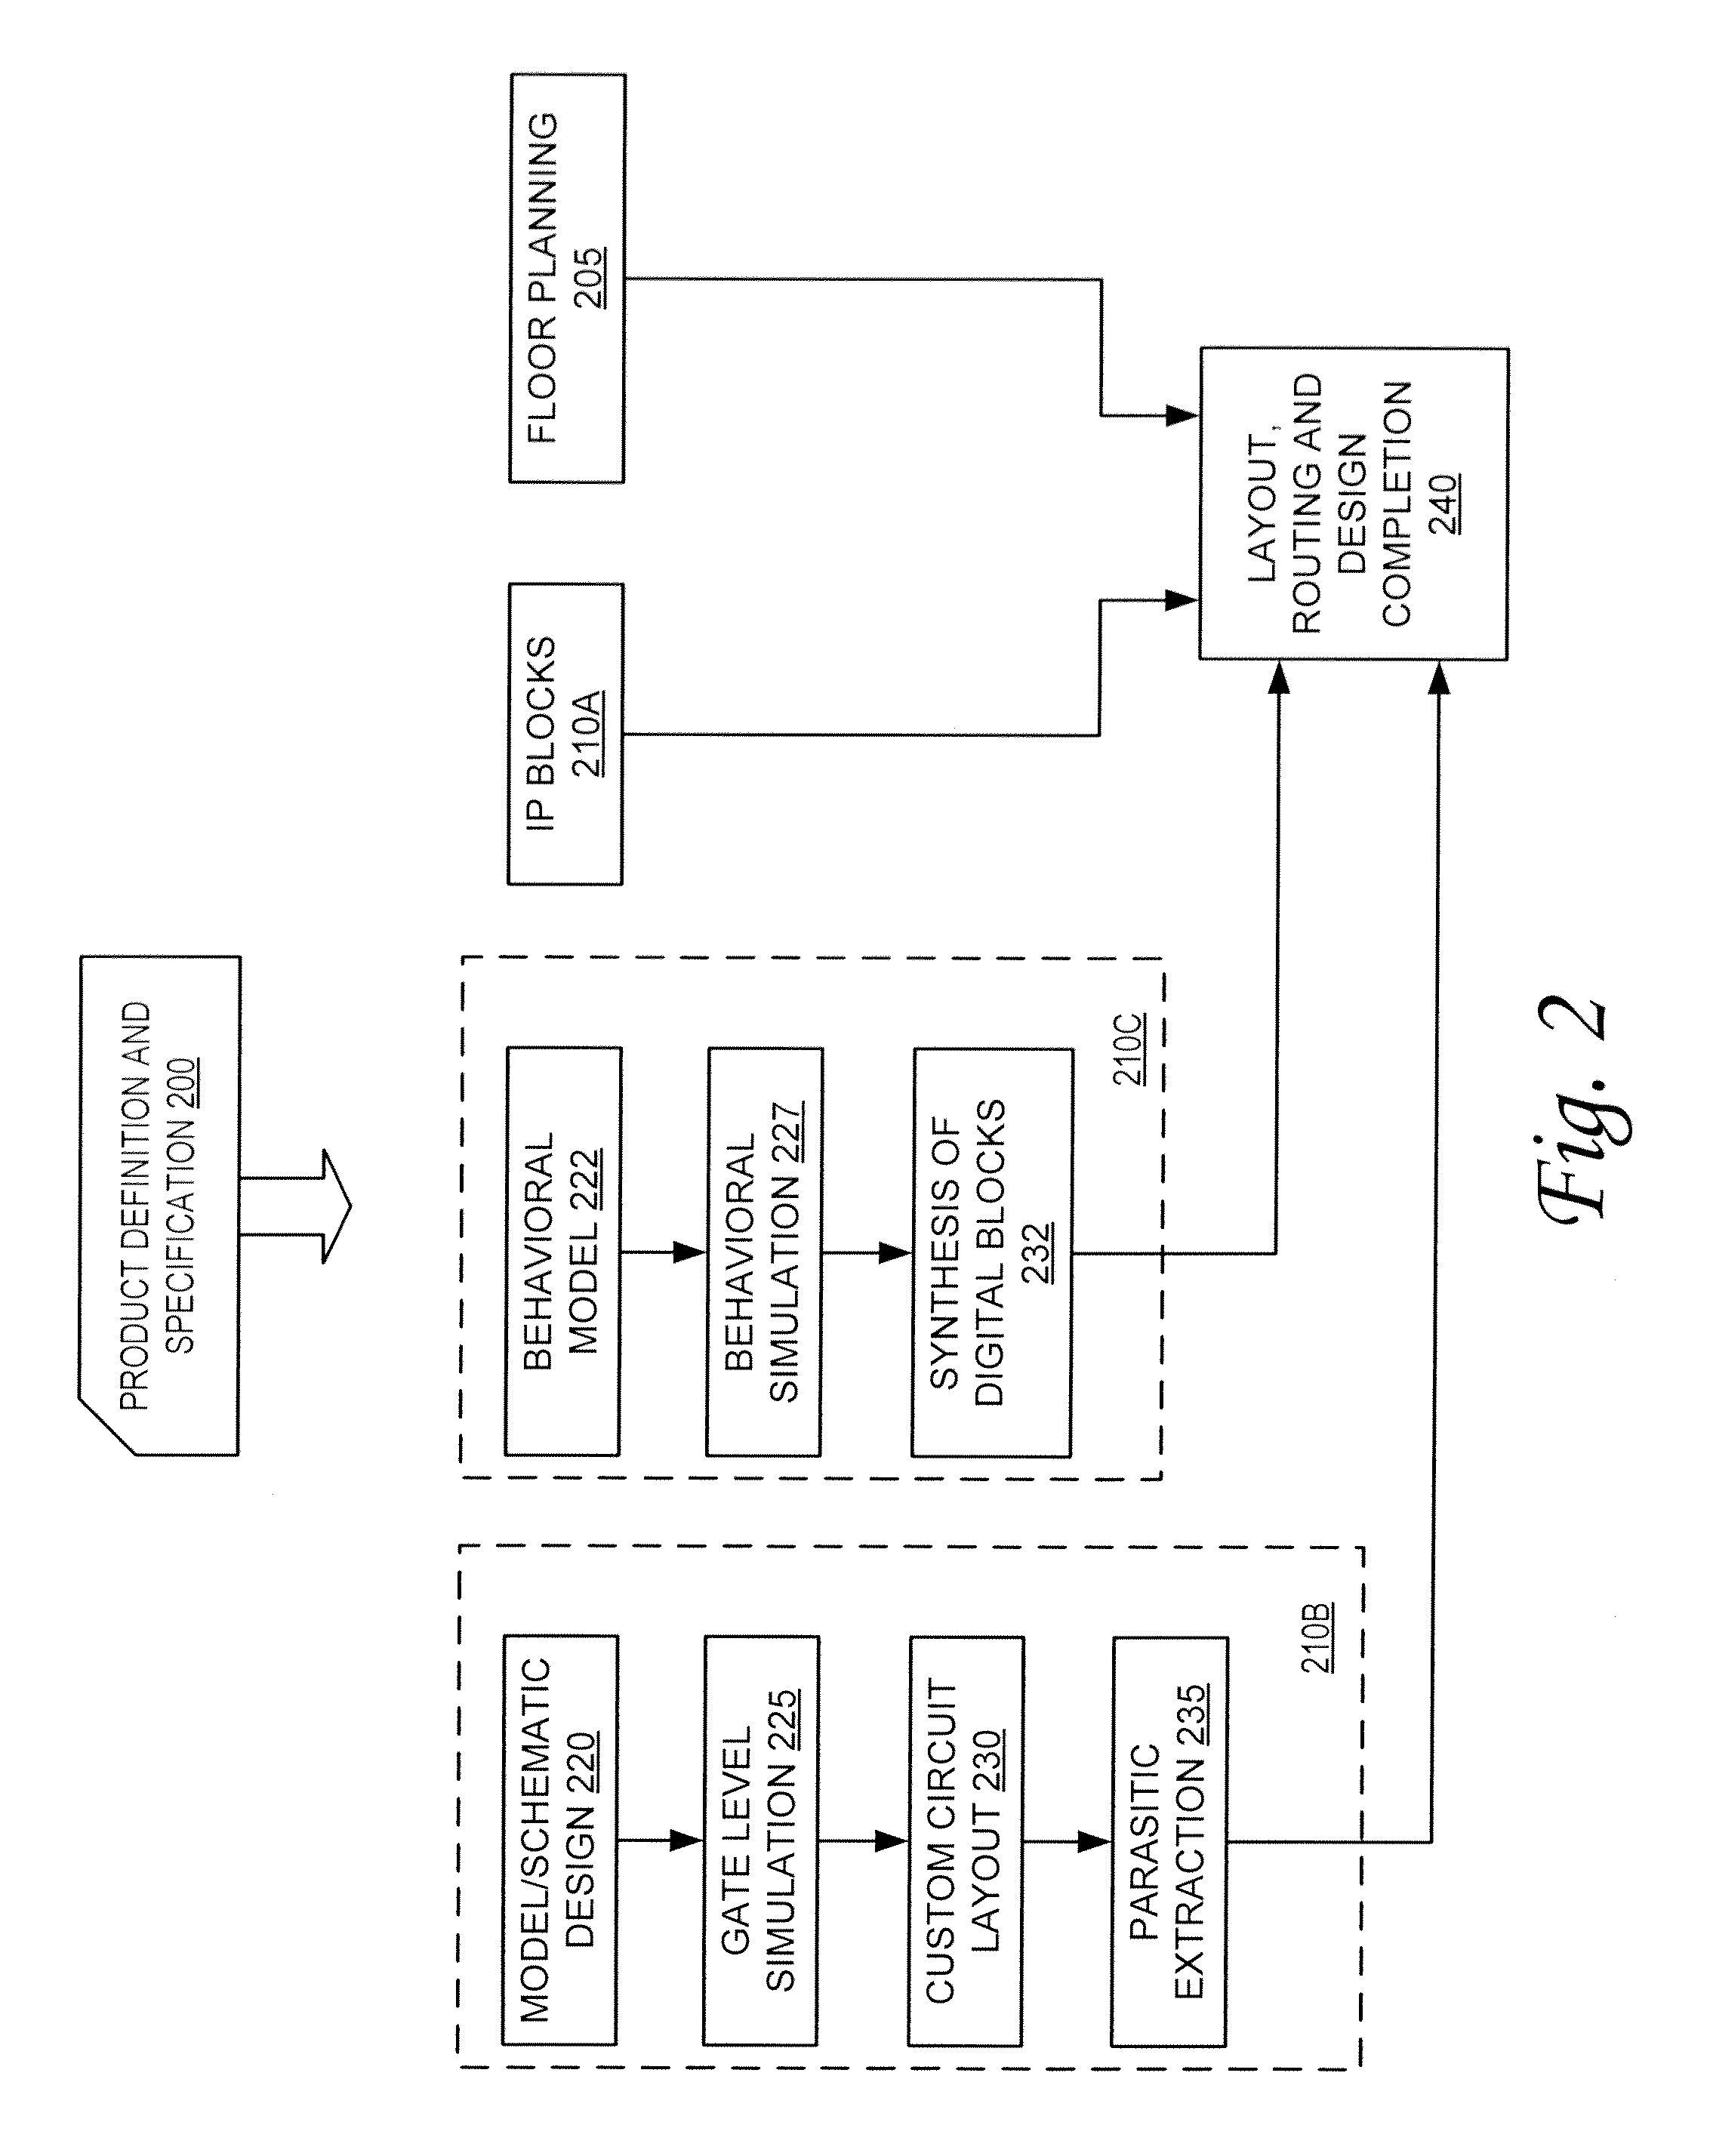 System and method for automated real-time design checking